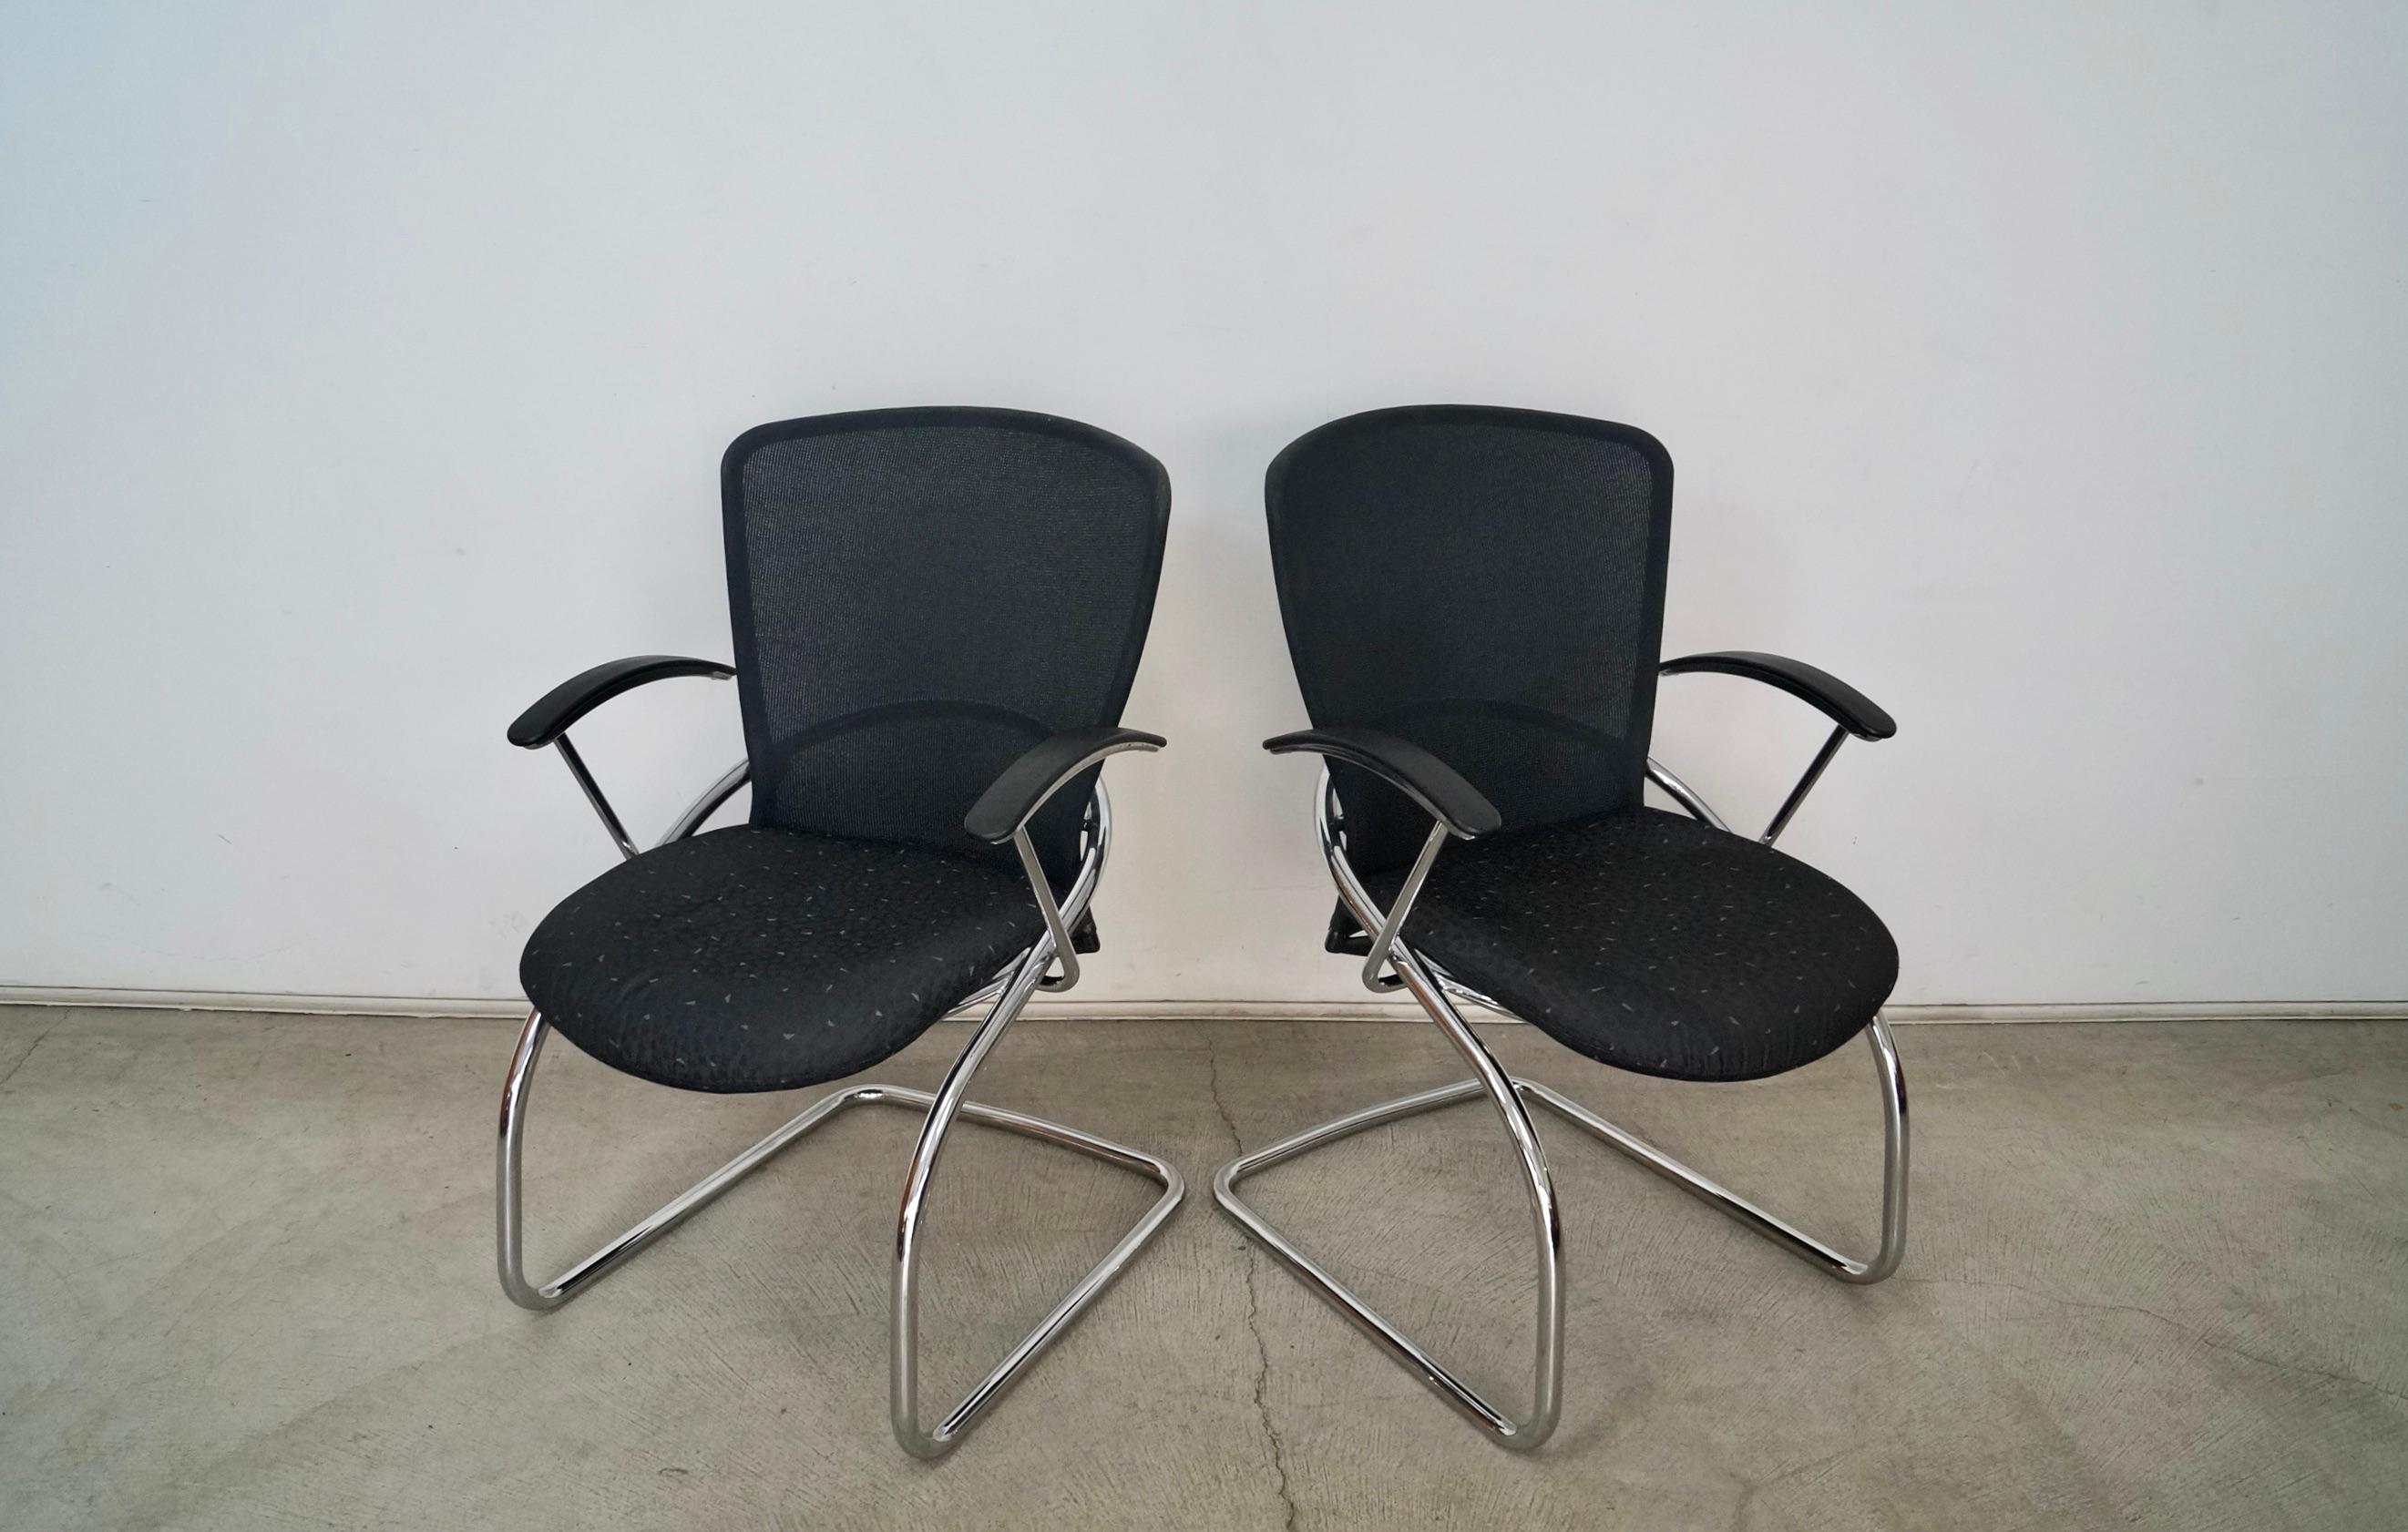 1990's Postmodern German Chrome Cantilever Arm Chairs - A Pair In Excellent Condition For Sale In Burbank, CA